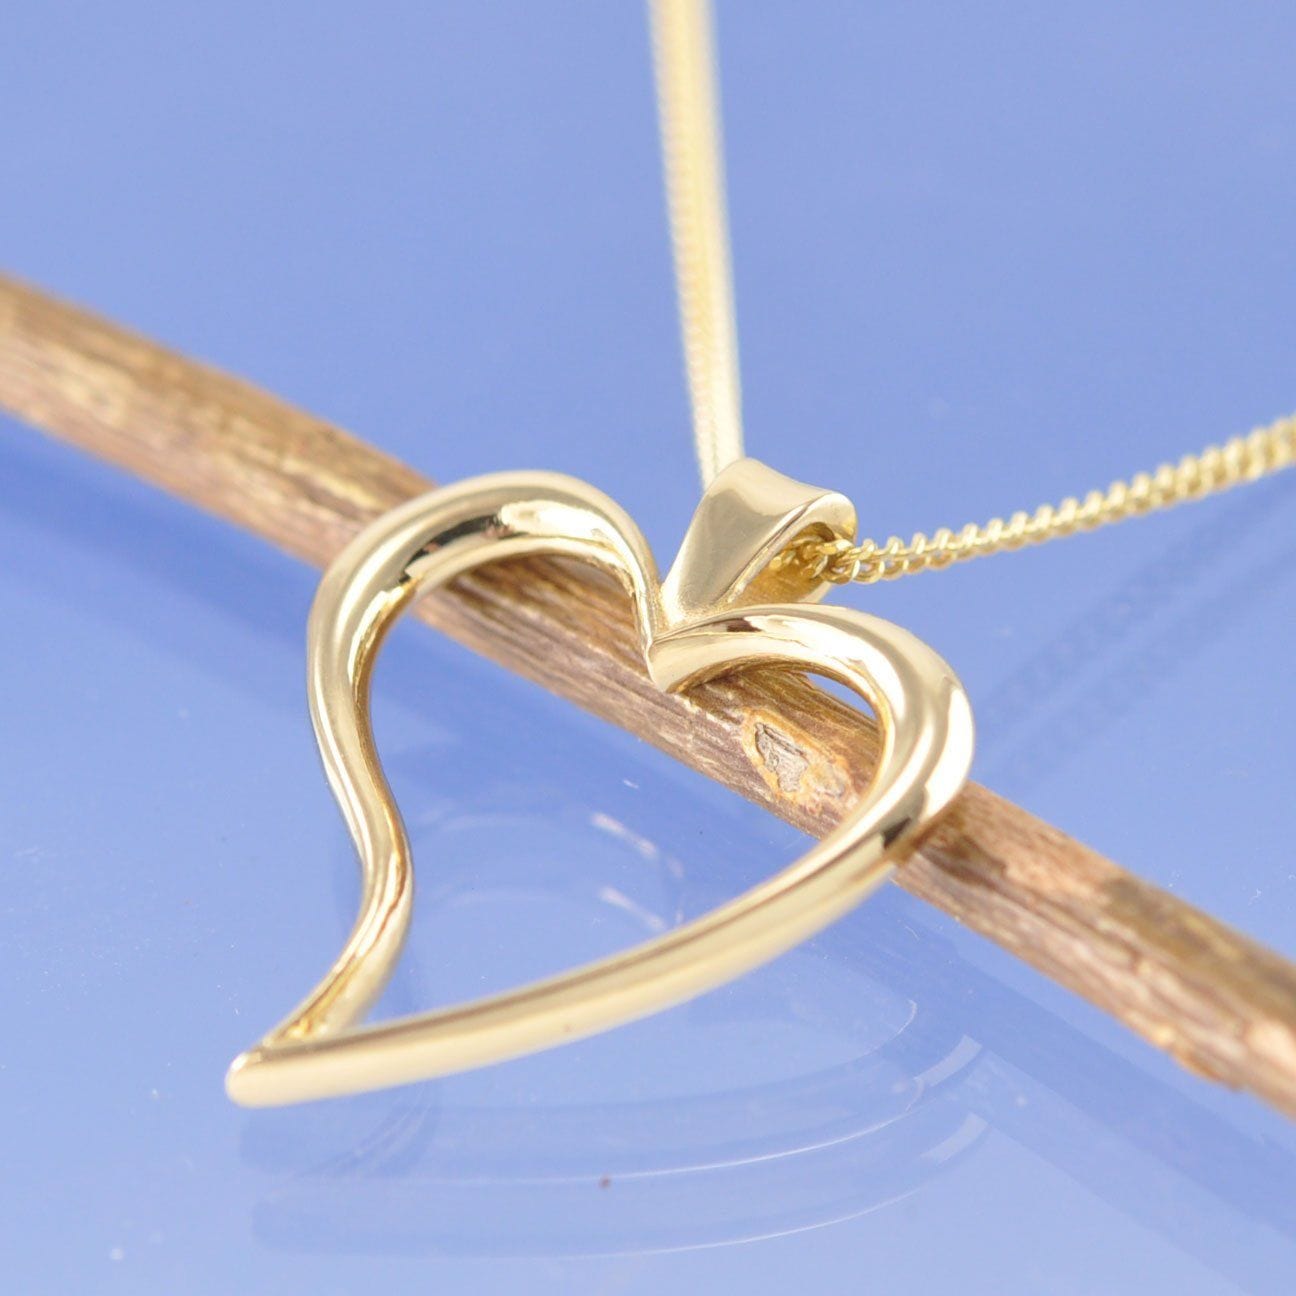 Melt your own wedding ring or rings into this heart Ring by Chris Parry Jewellery